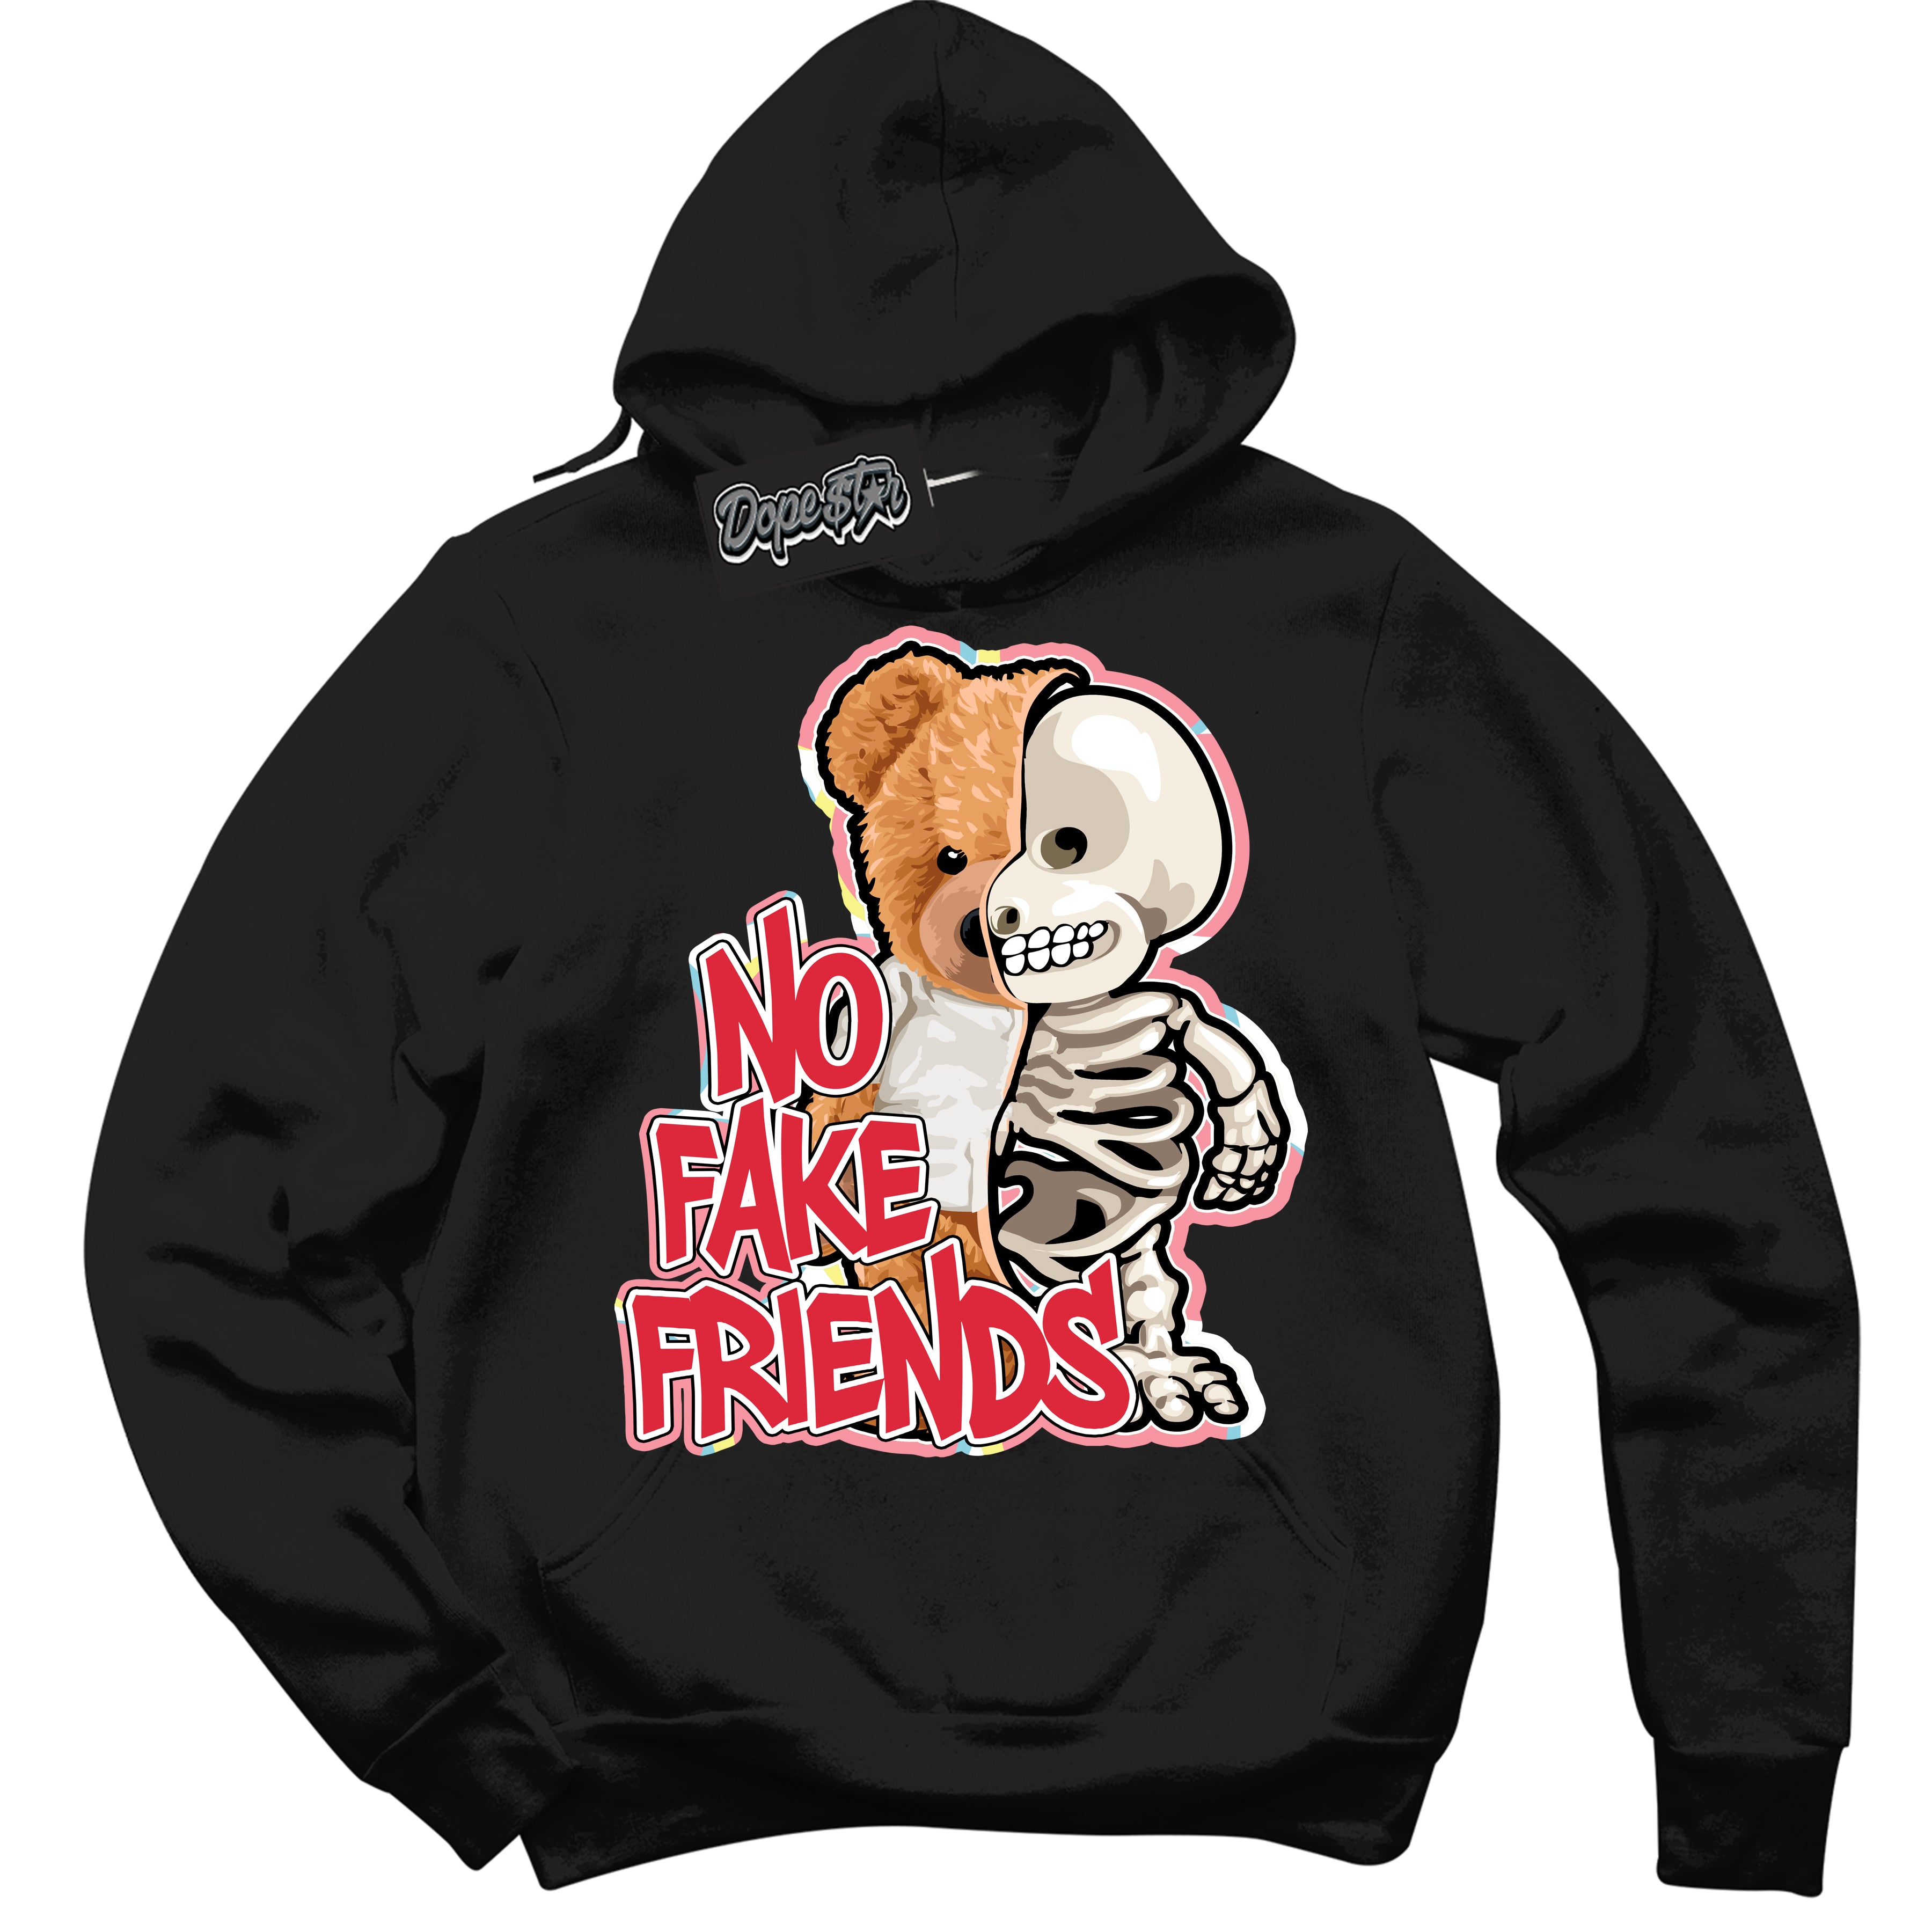 Cool Black Graphic DopeStar Hoodie with “ No Fake Friends “ print, that perfectly matches Spider-Verse 1s sneakers